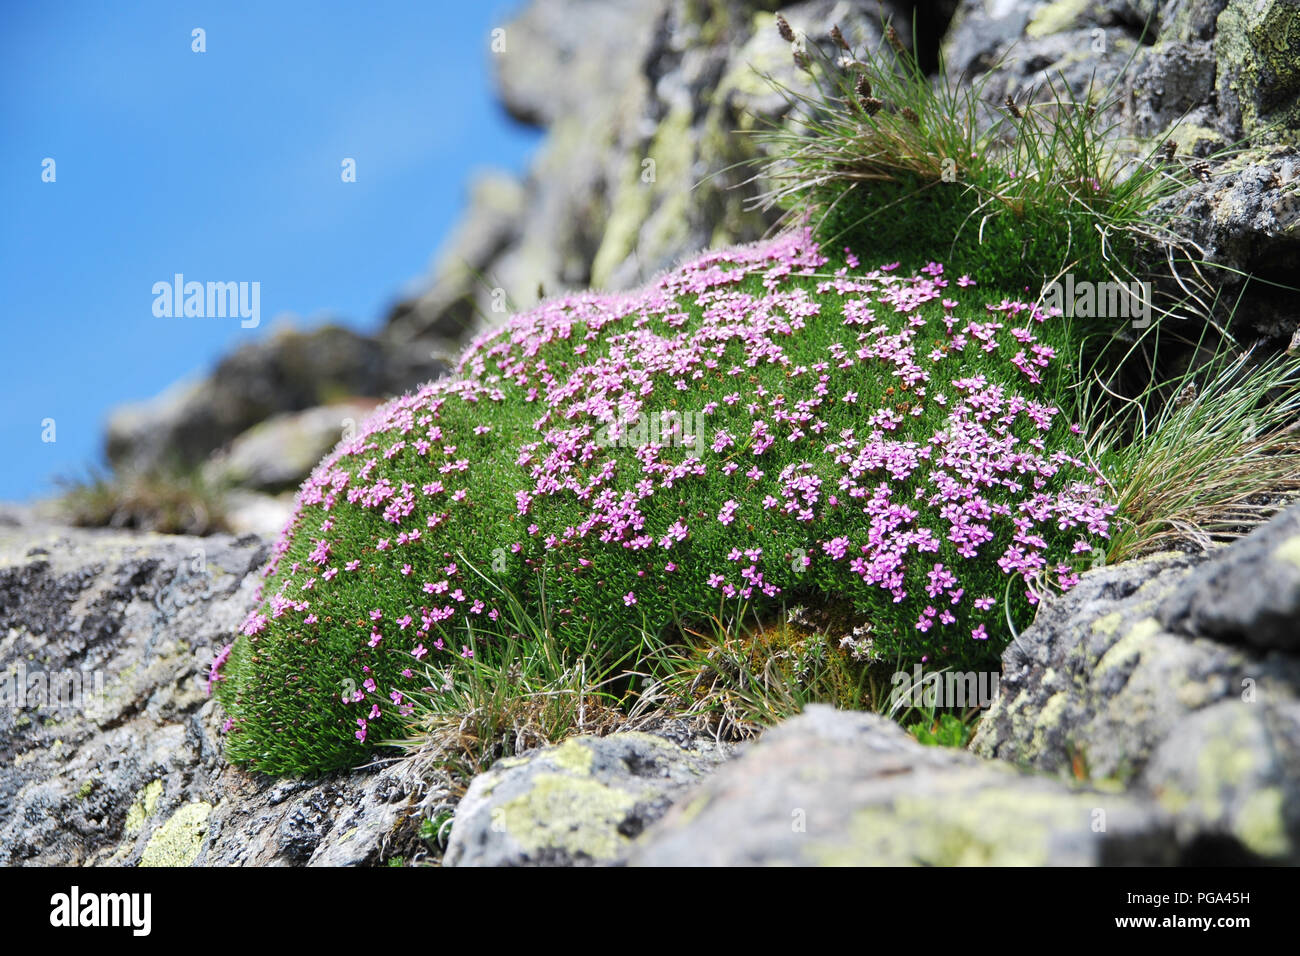 a pillow of pink Androsace, commonly known as rockjasmine, high up in the Austrian alps between rocks Stock Photo